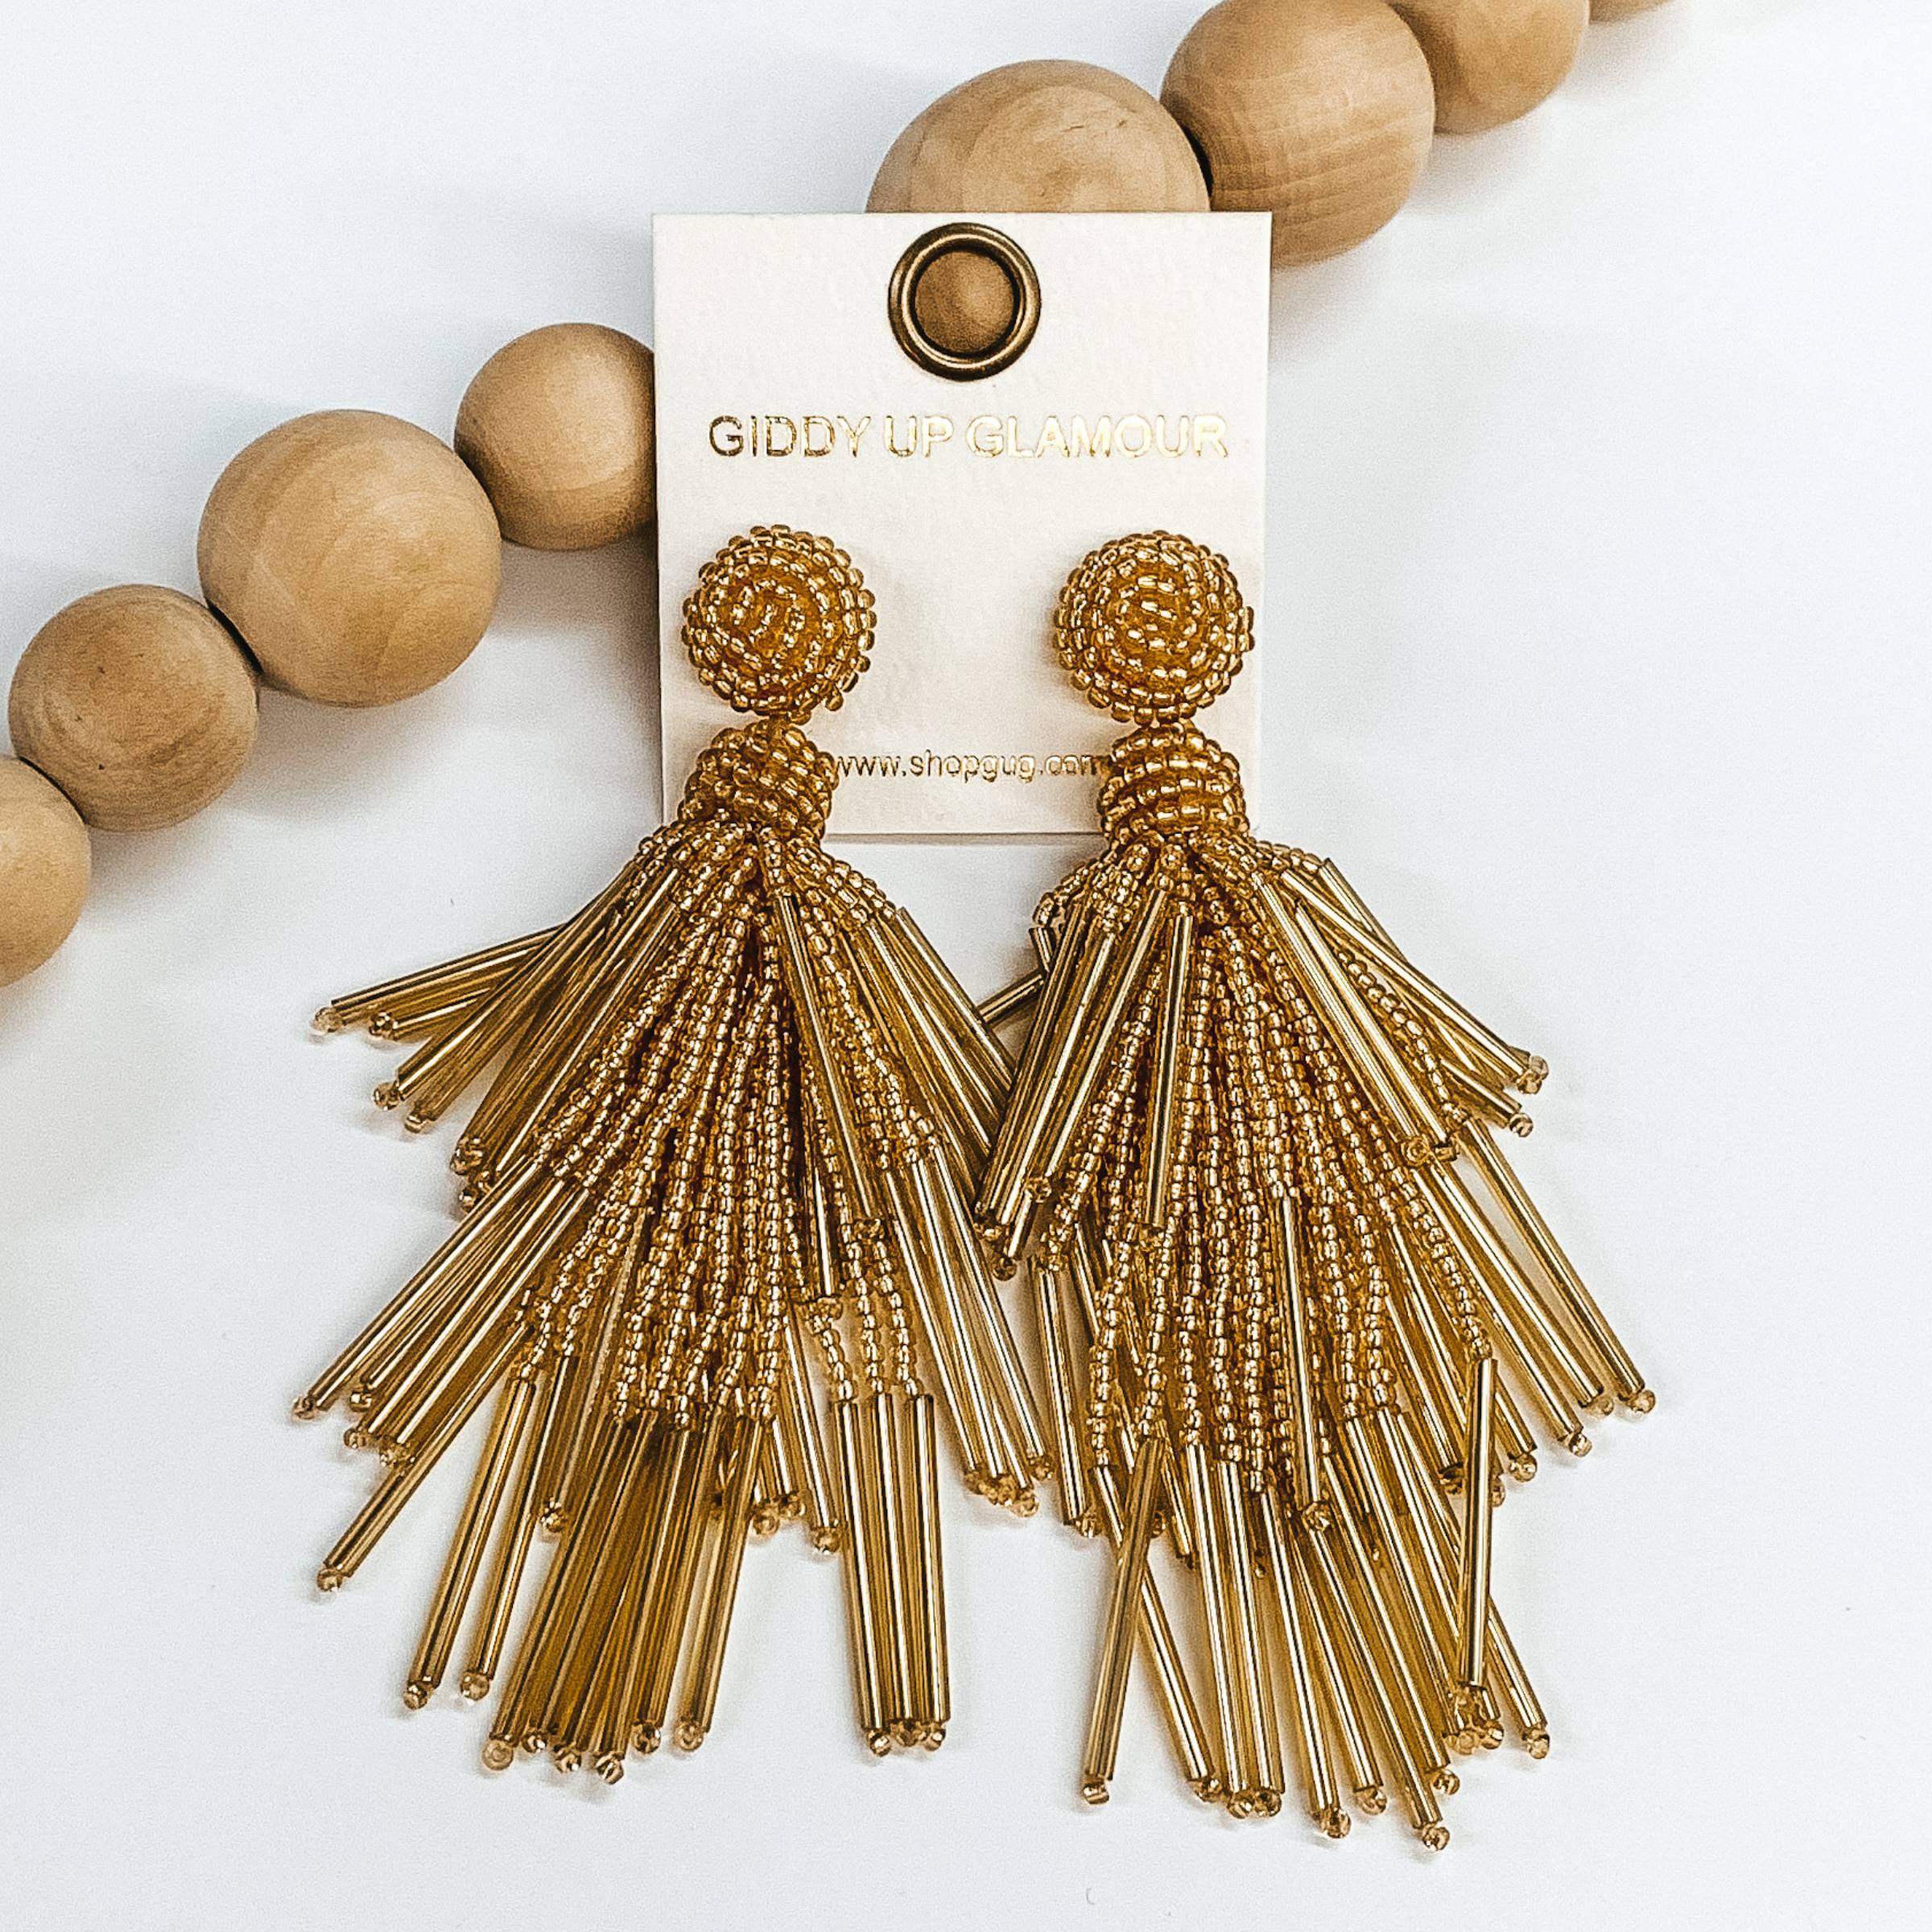 Circle beaded stud earrings with a beaded  tassel in gold. These earrings are pictured  laying on a white background with brown beads as  decor.